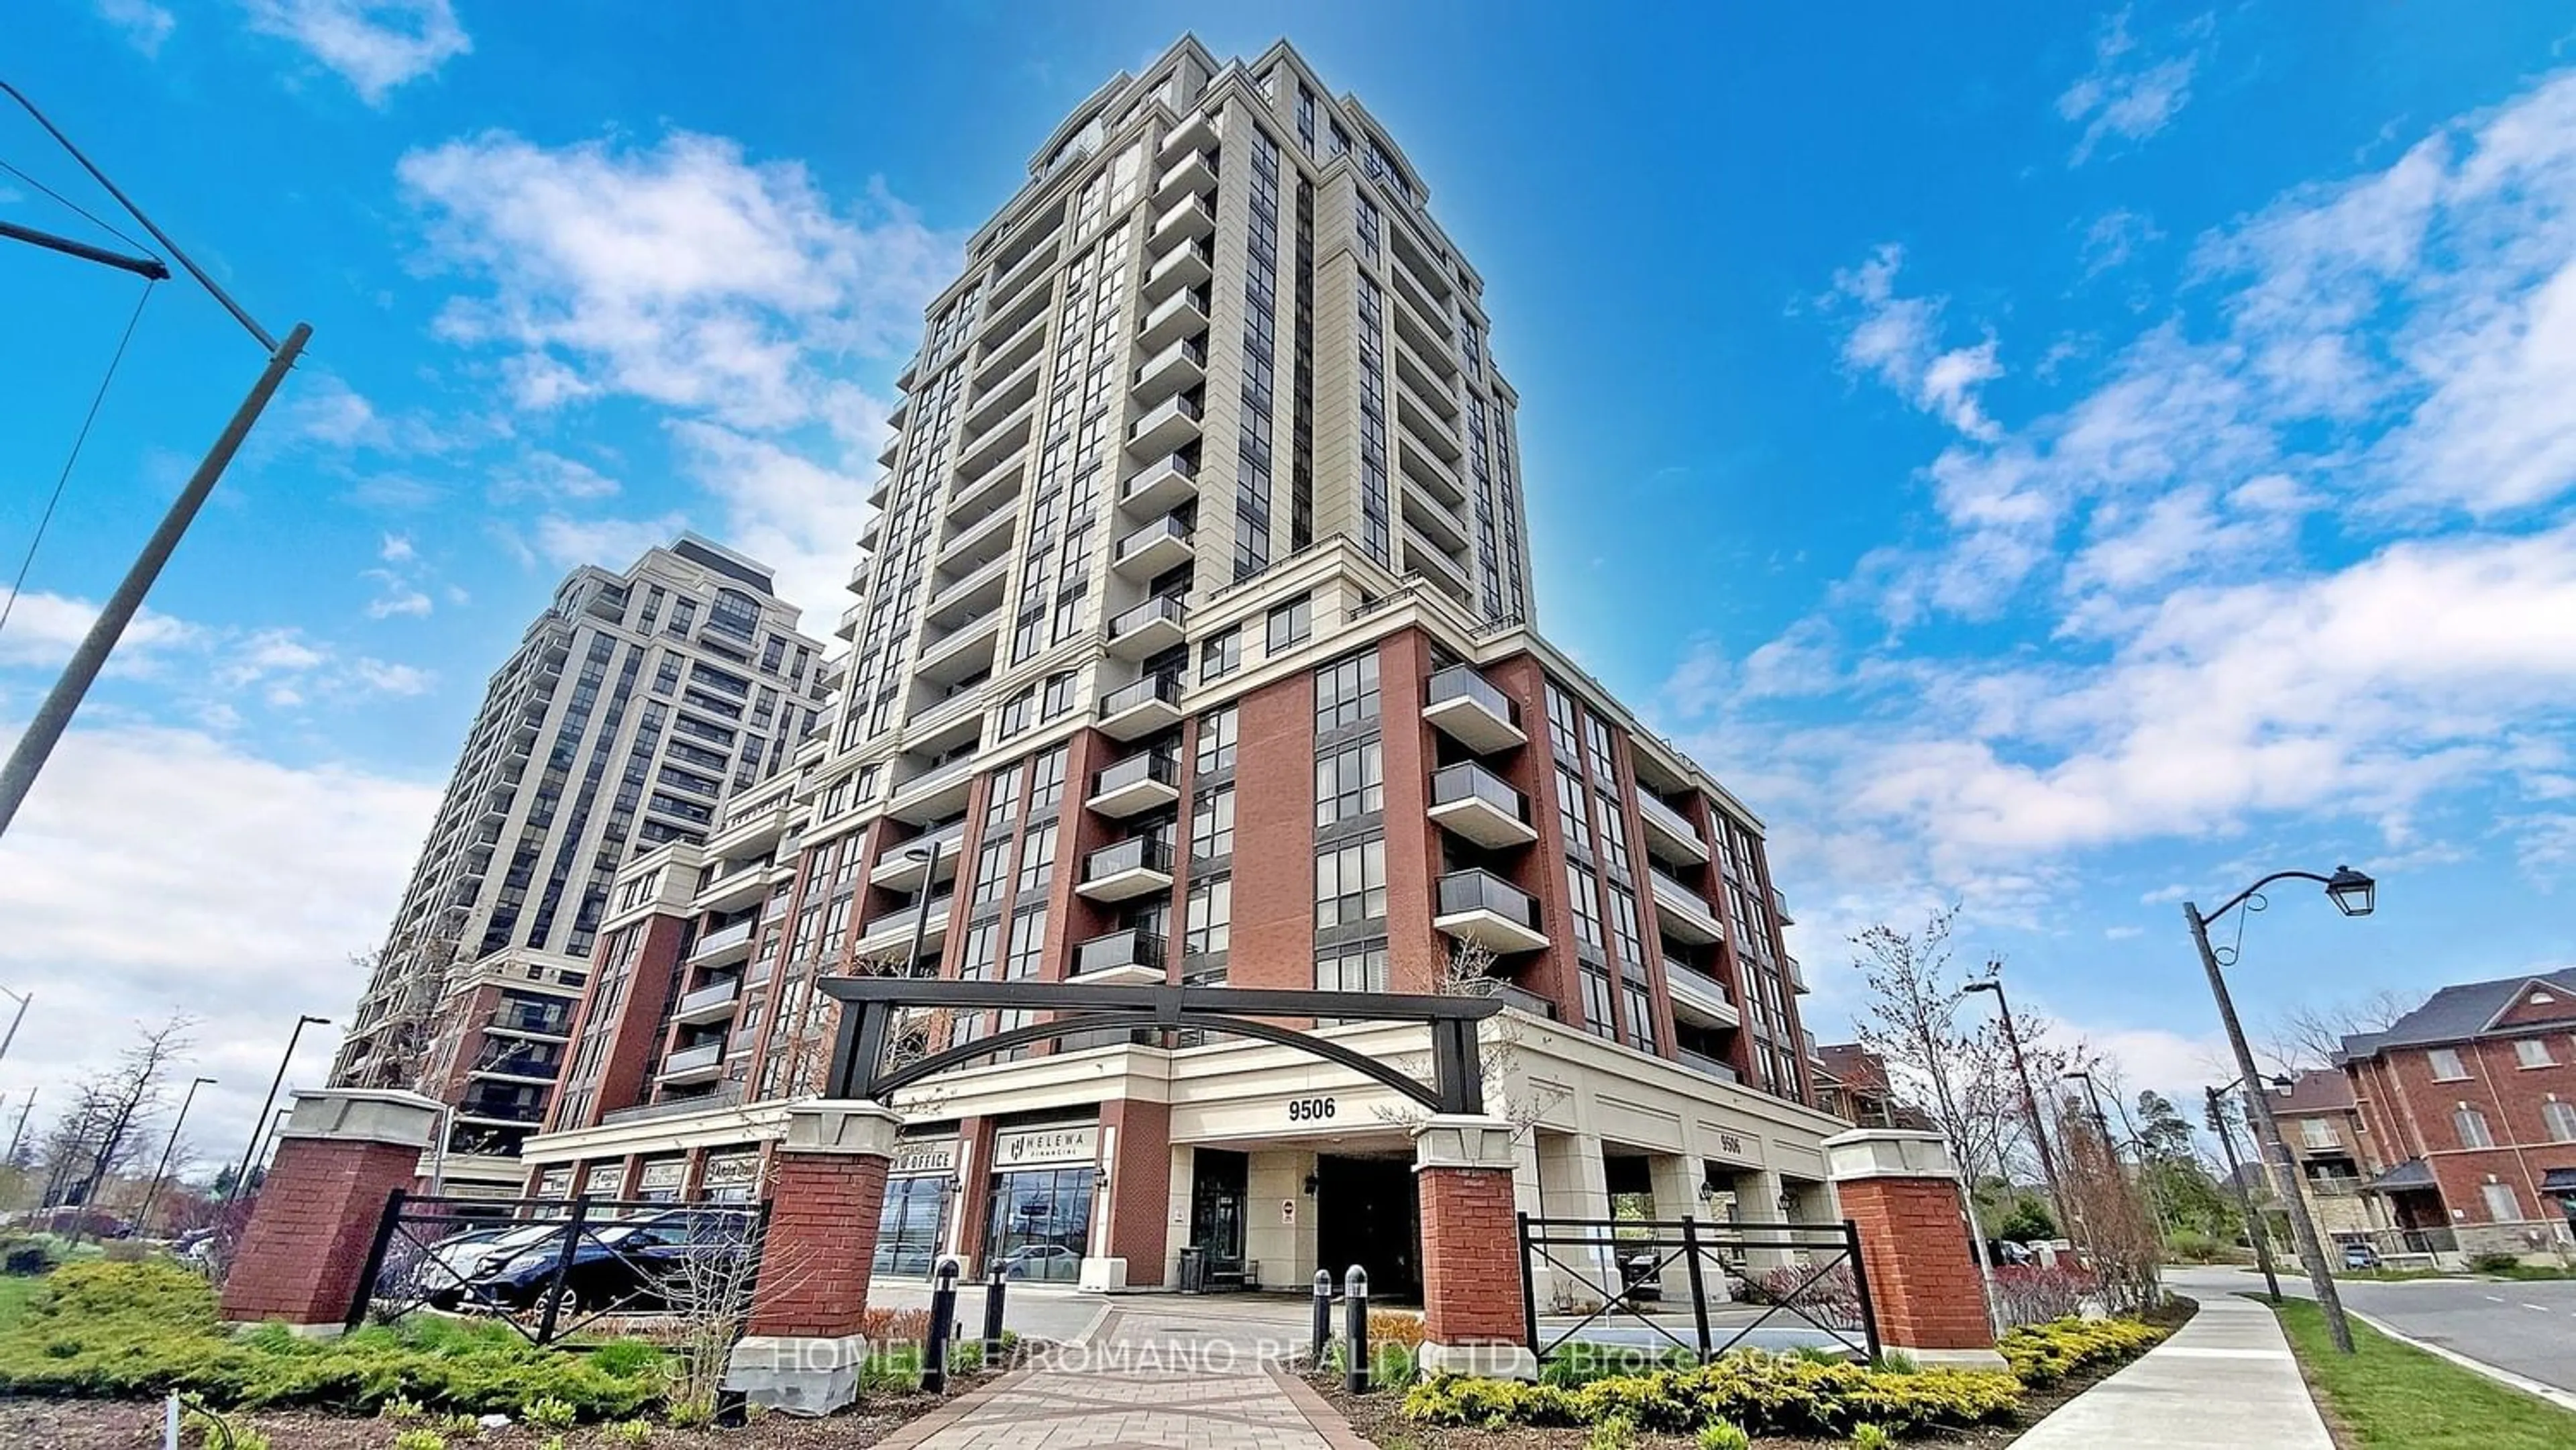 A pic from exterior of the house or condo for 9506 Markham Rd #309, Markham Ontario L6E 0S5